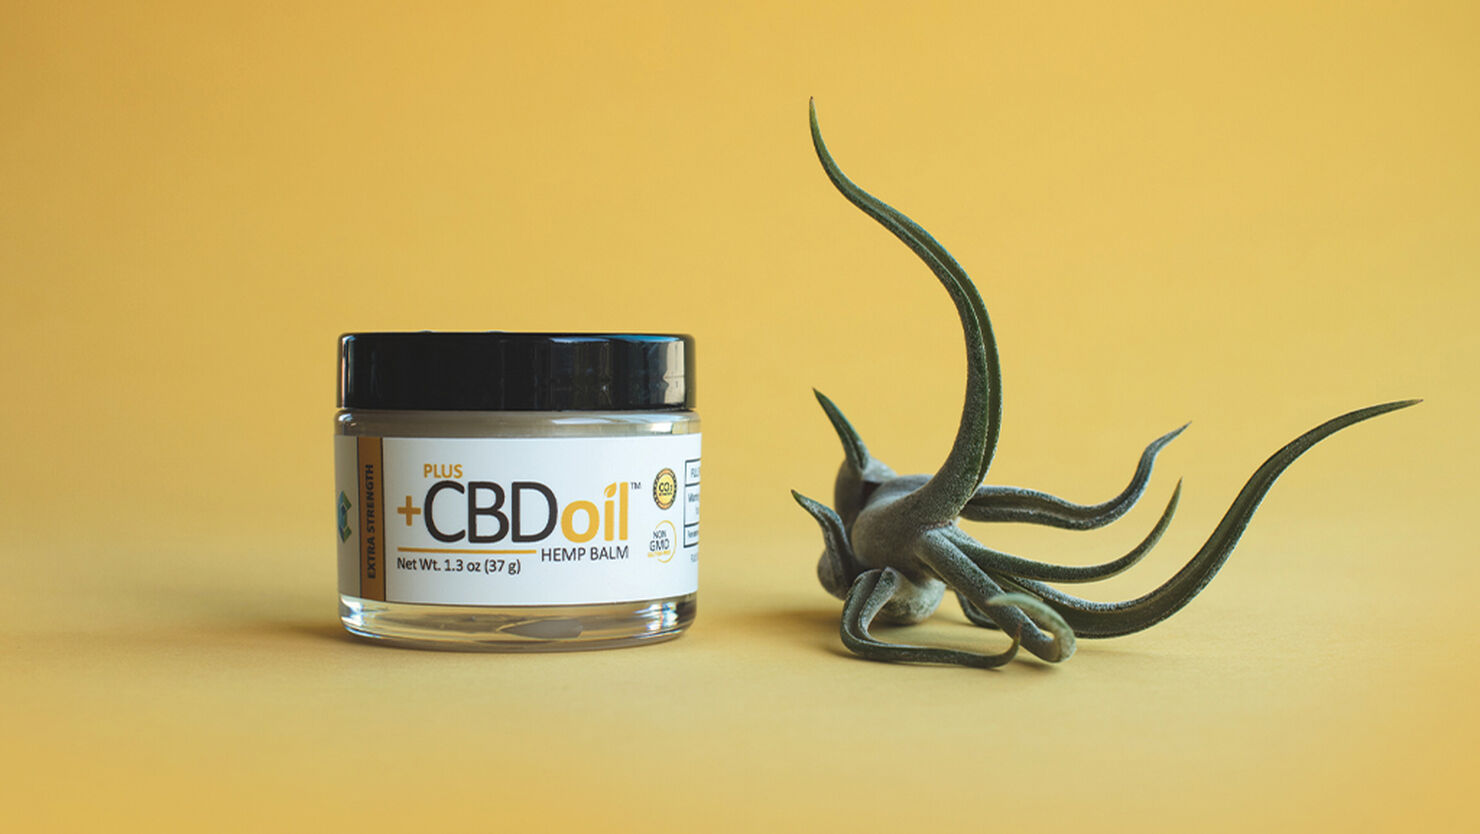 What is CBD Balm and other Skincare products Used For?